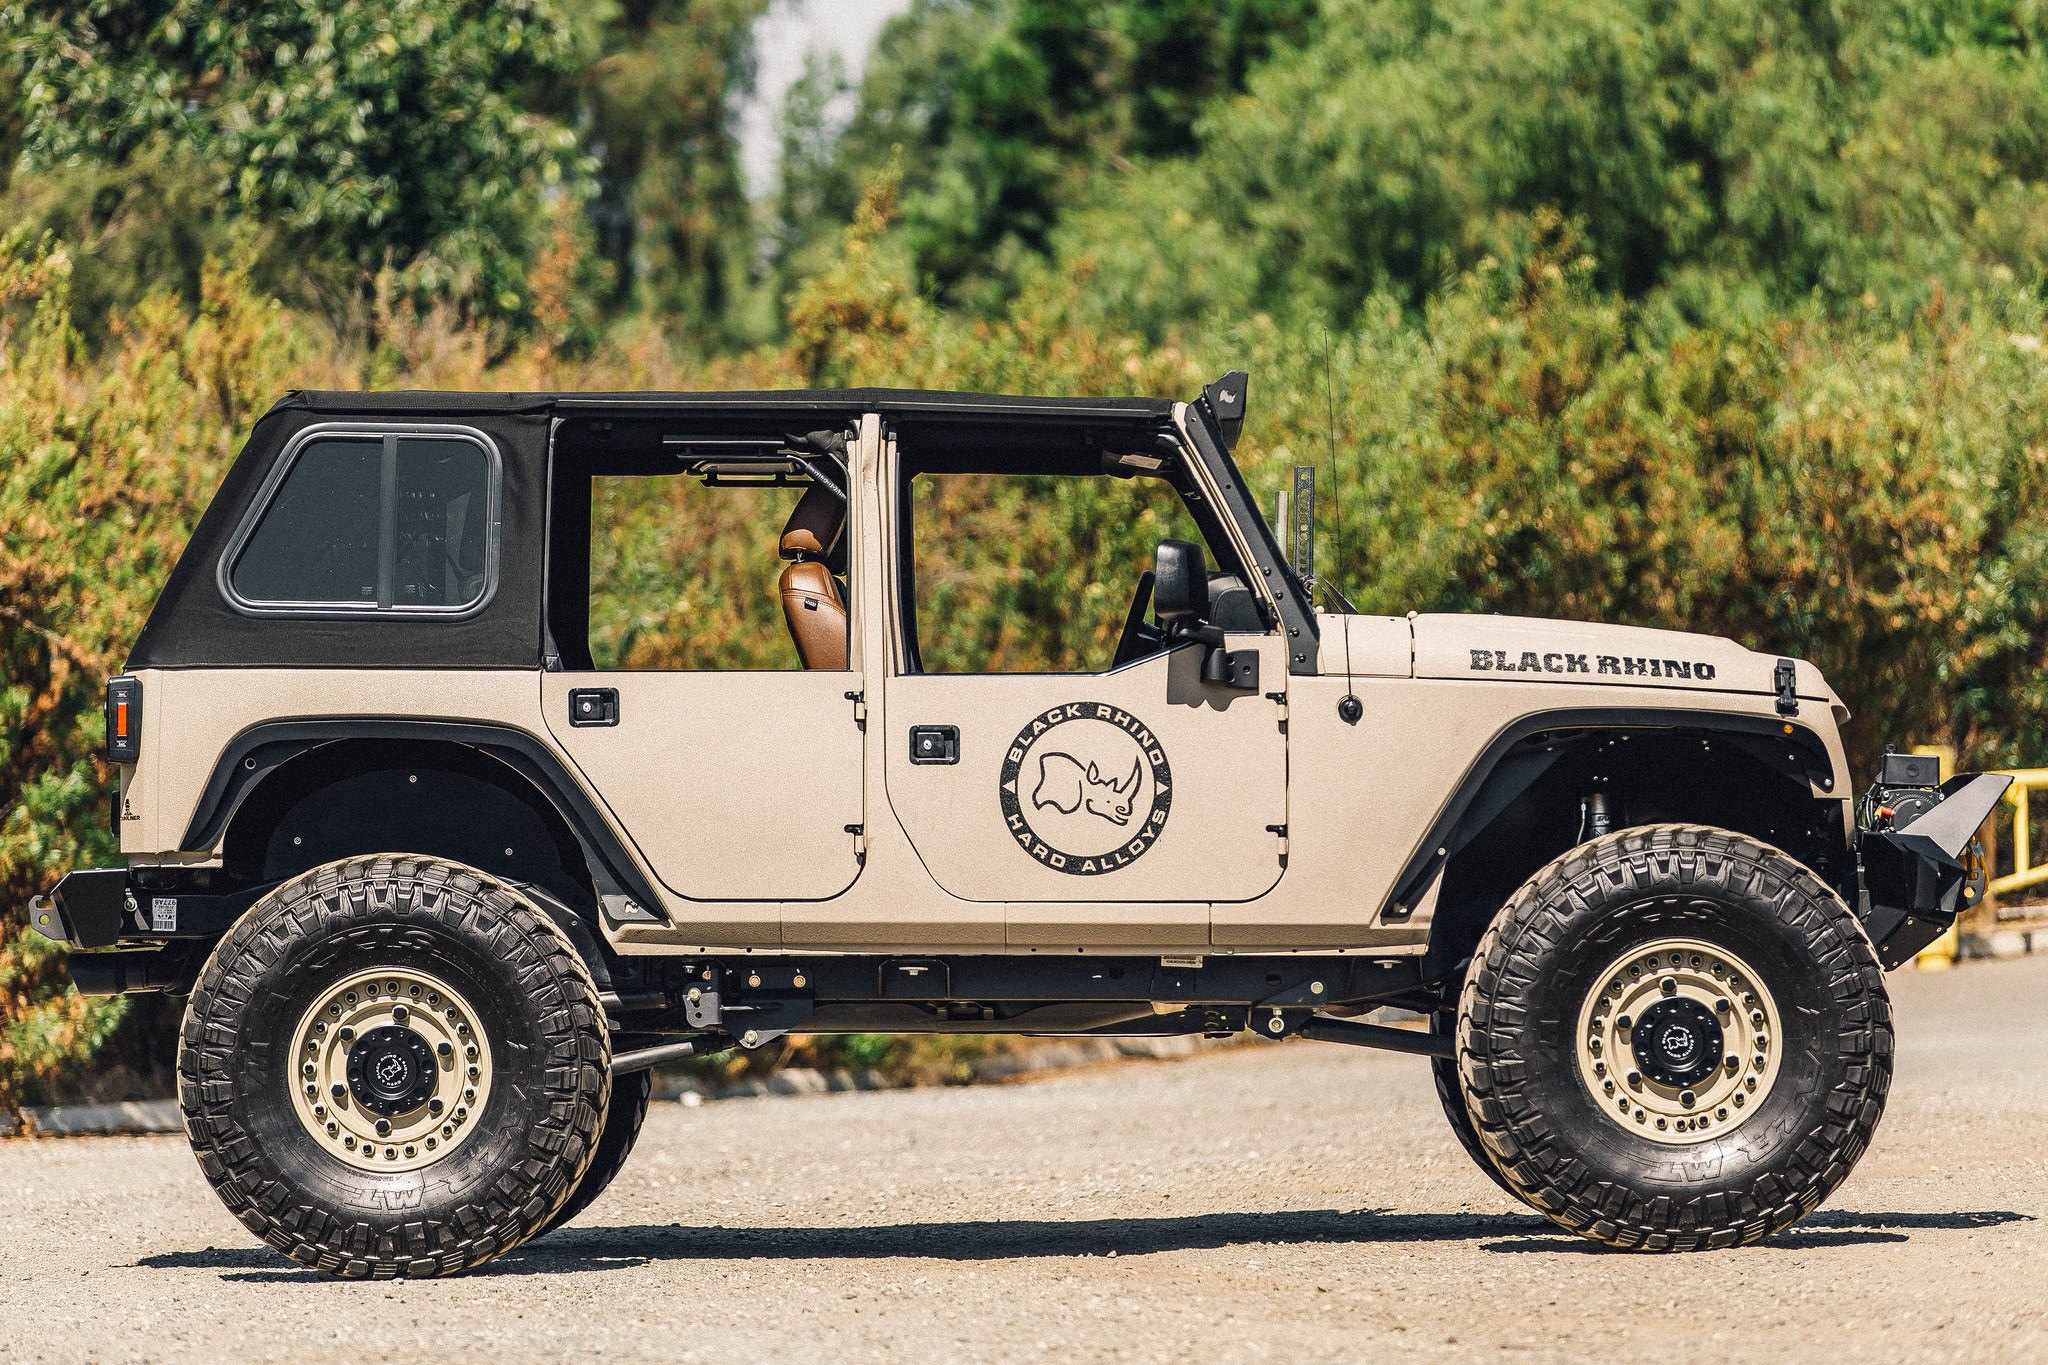 Aftermarket Soft Top on Gray Lifted Jeep Wrangler - Photo by Black Rhino